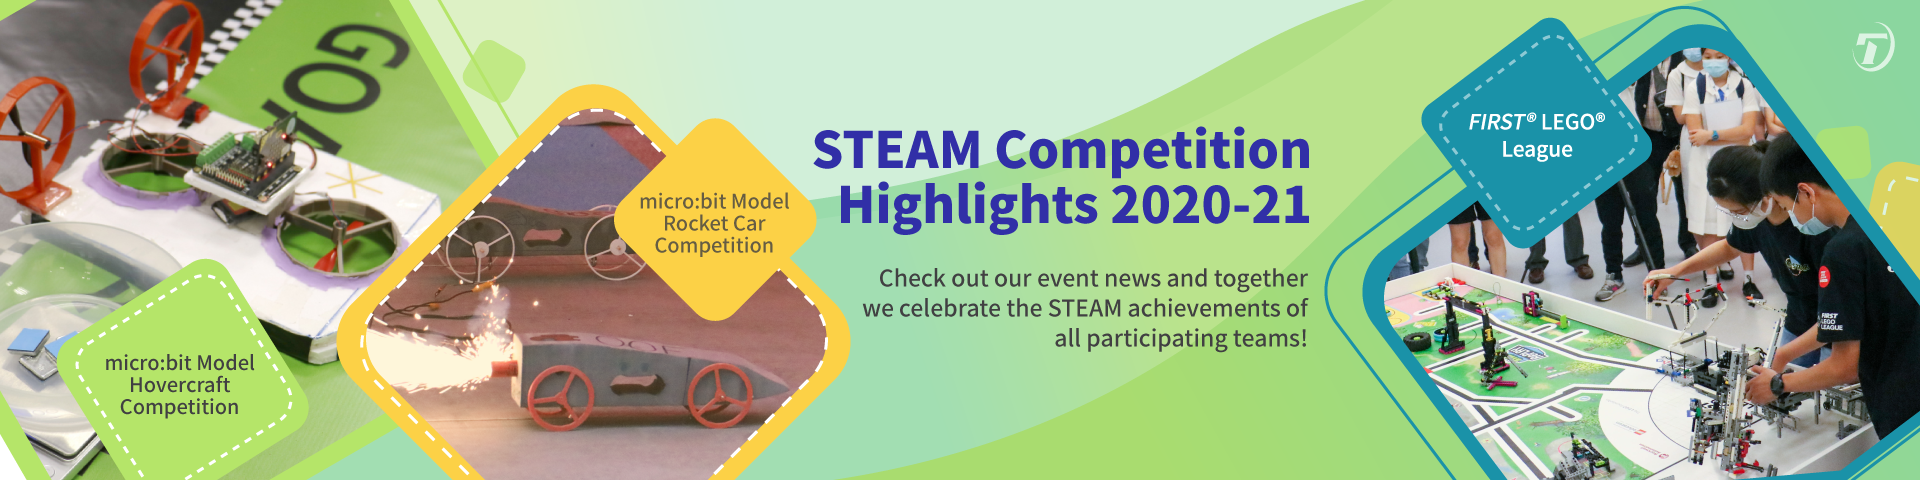 STEAM Competition Highlights 2020-21